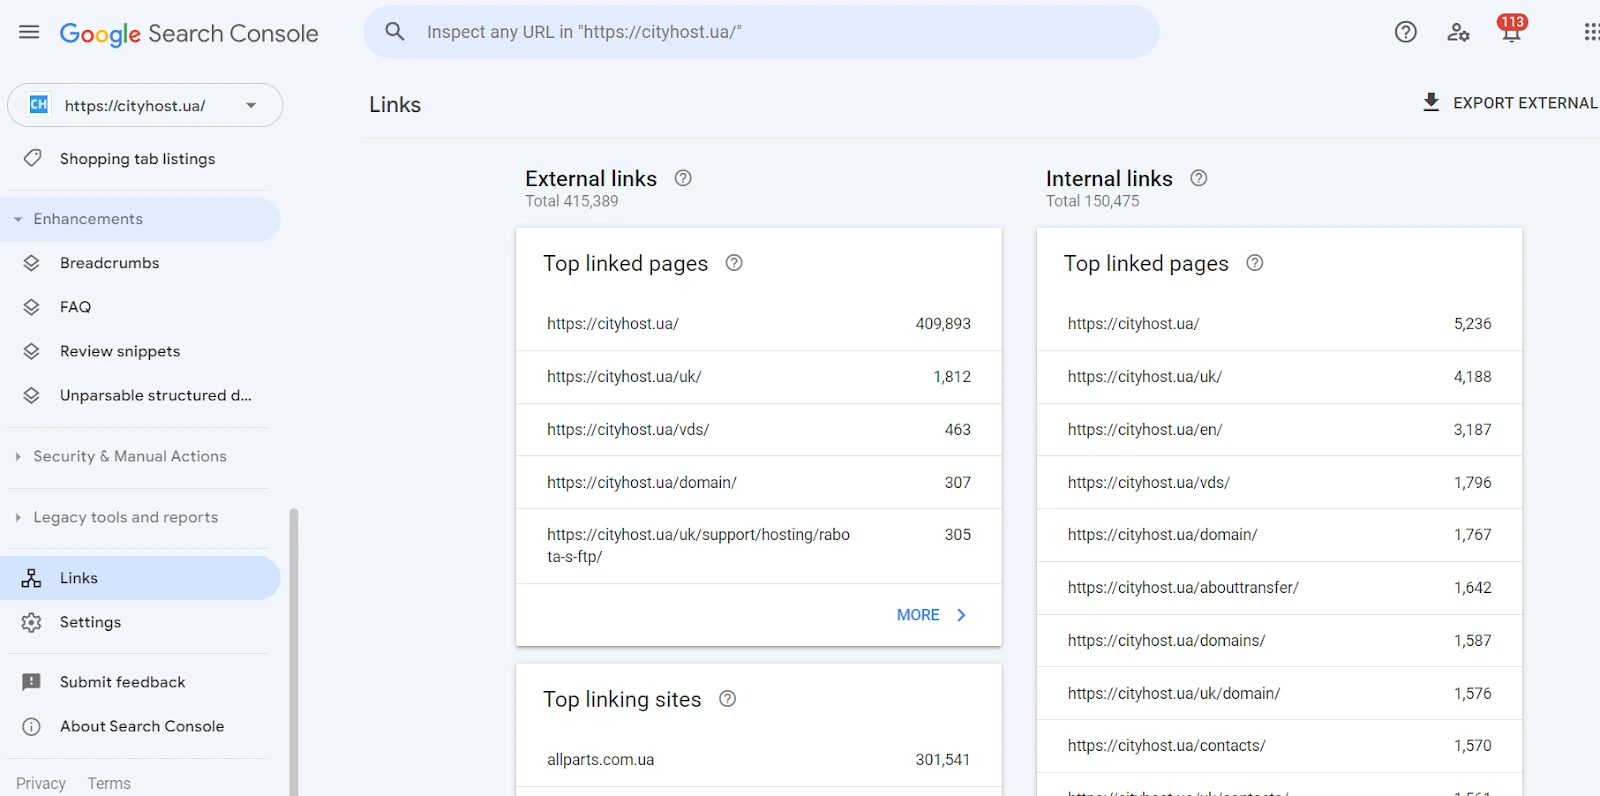 View internal and external links to the site through Google Search Console